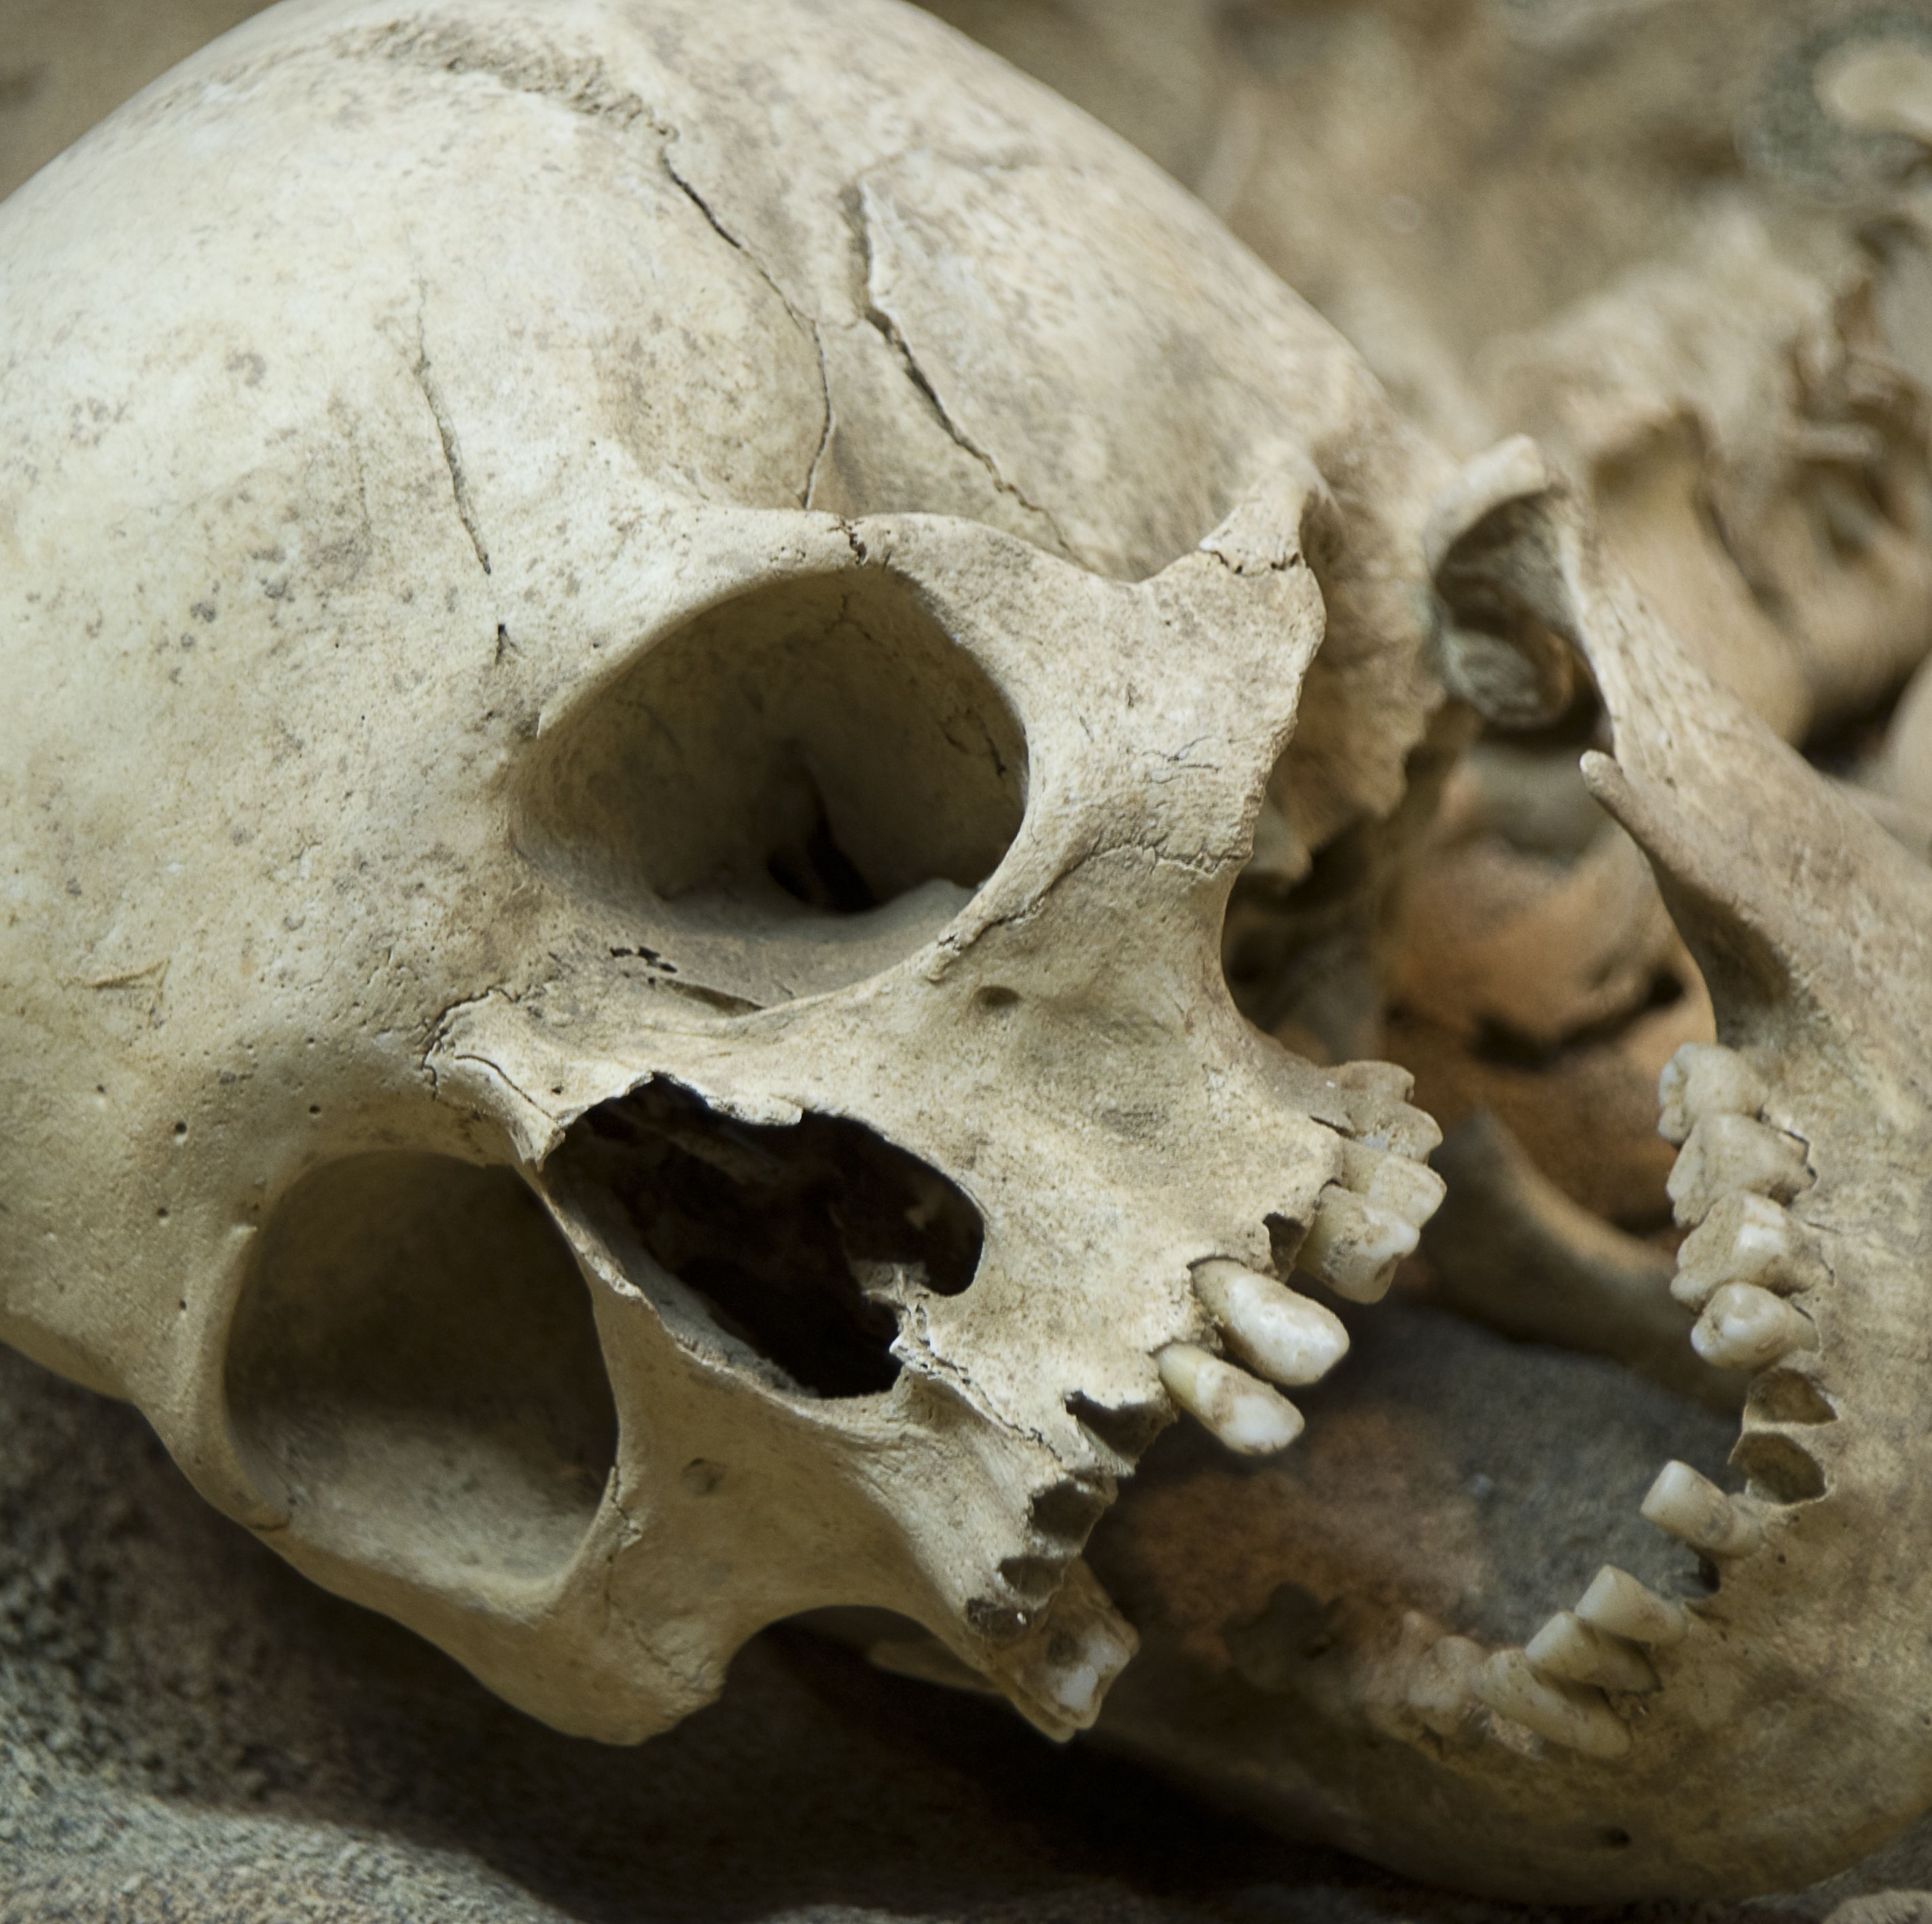 Scientists Might Have Discovered a Whole New Human Lineage